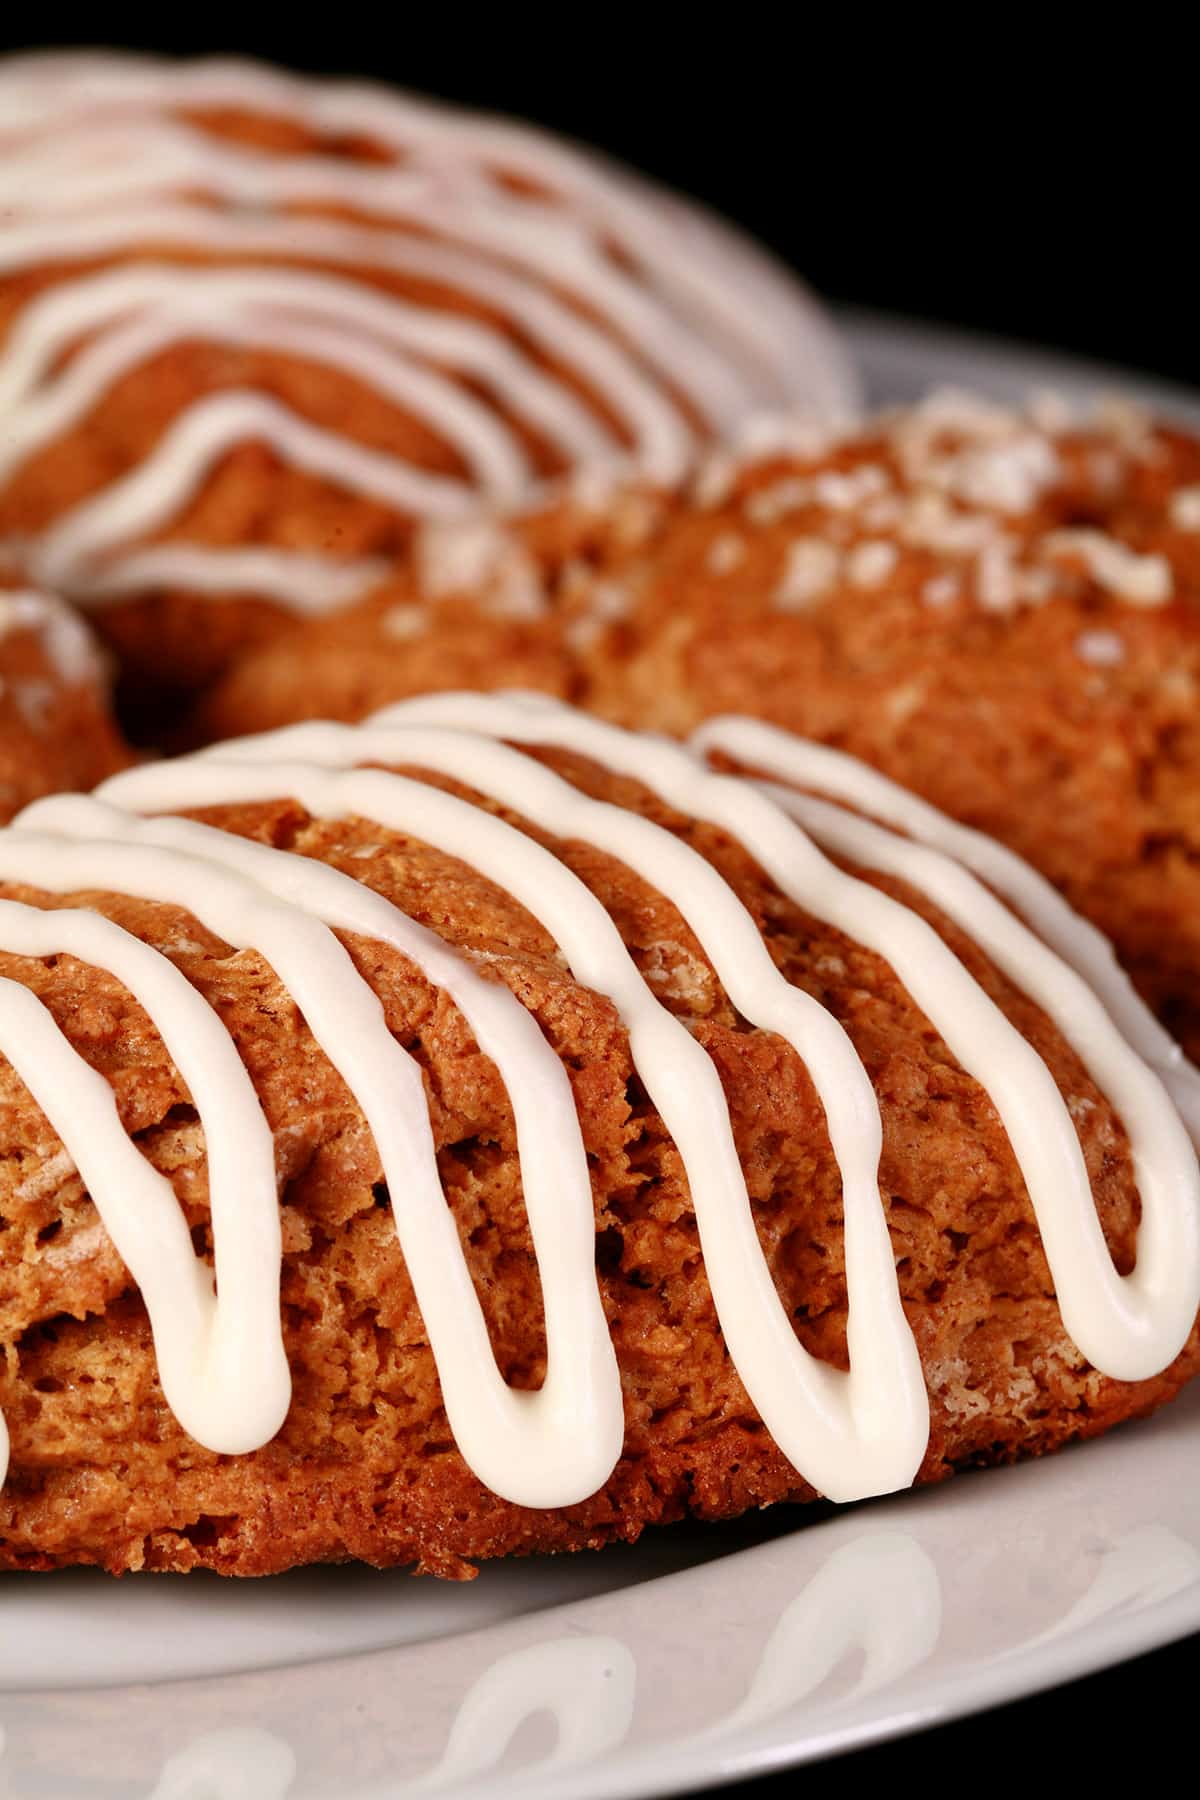 A plate of gingerbread scones. Some have sugar topping, others are drizzled with glaze.